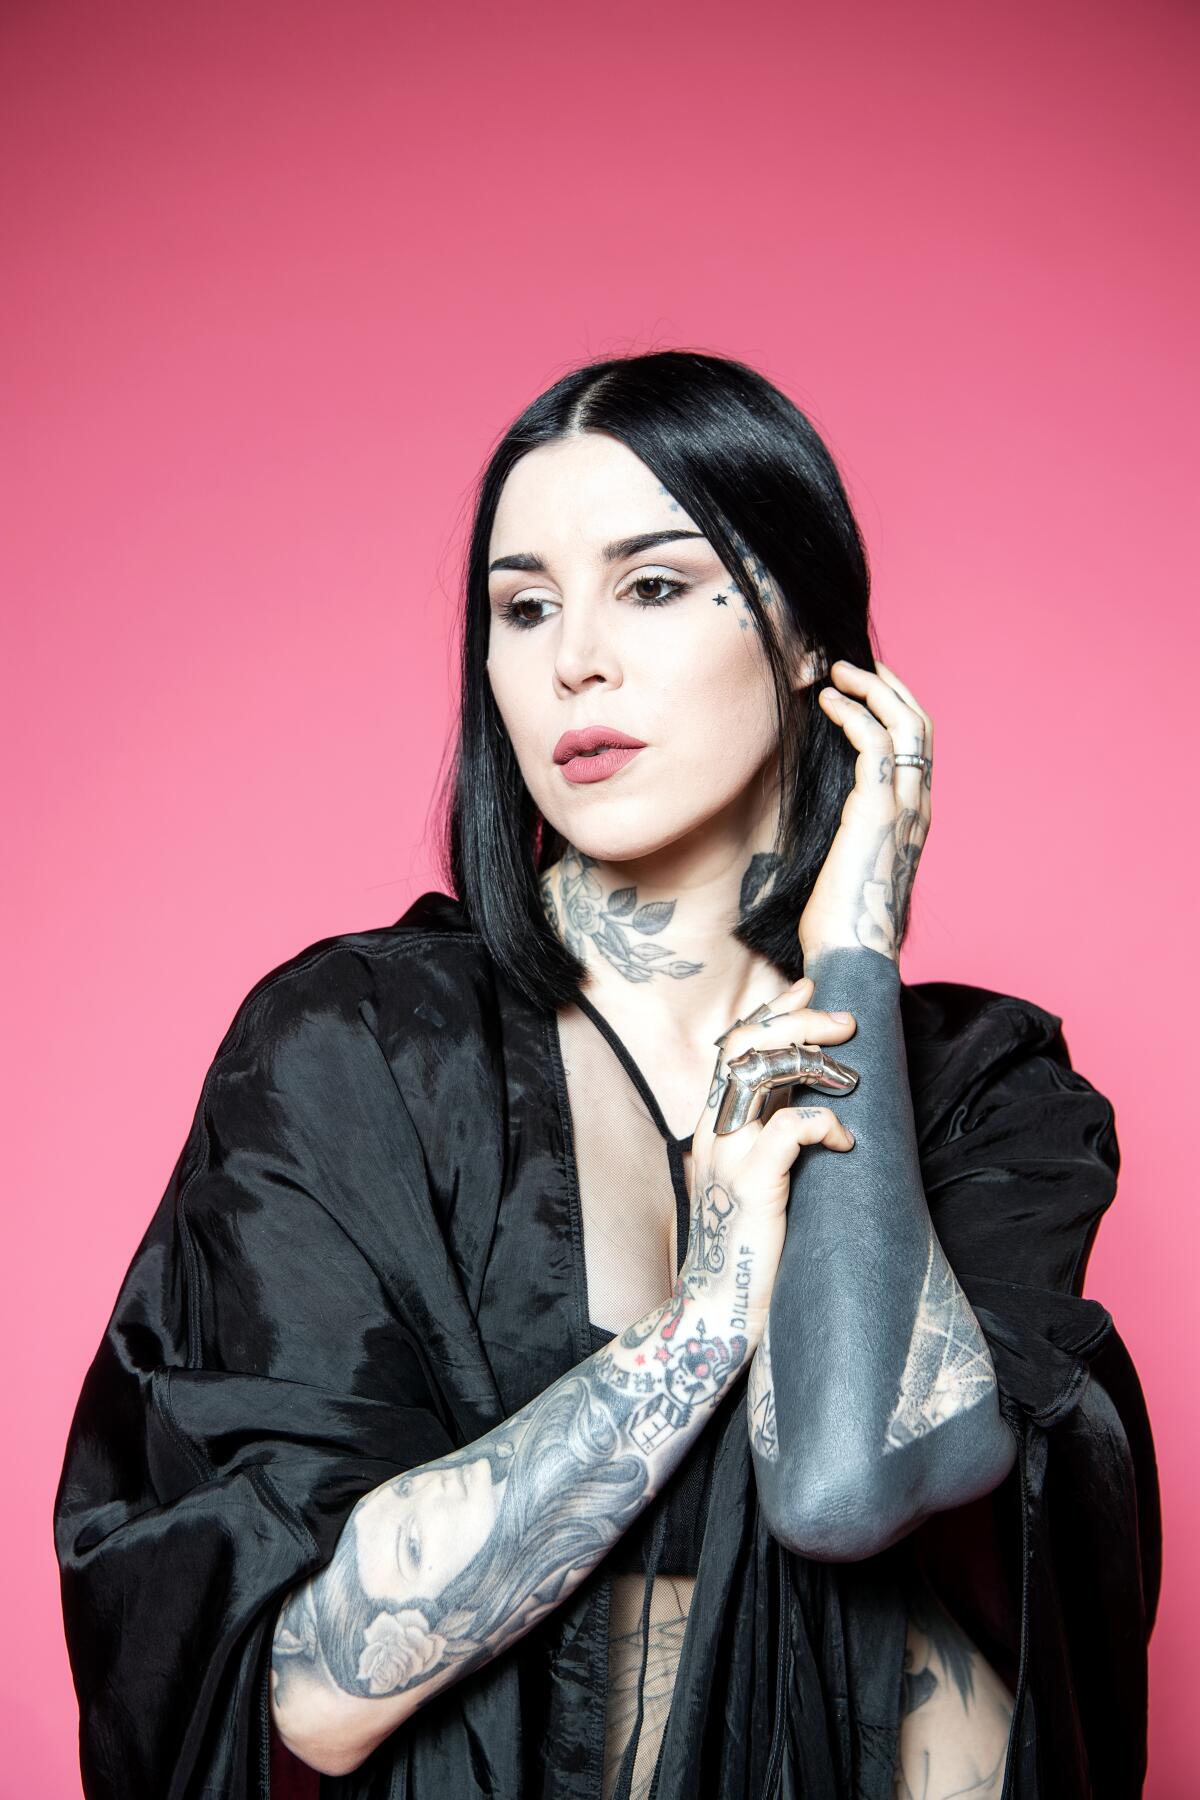 Tattoo artist Kat Von D rose to fame on the reality shows "Miami Ink" and her spinoff "L.A. Ink."